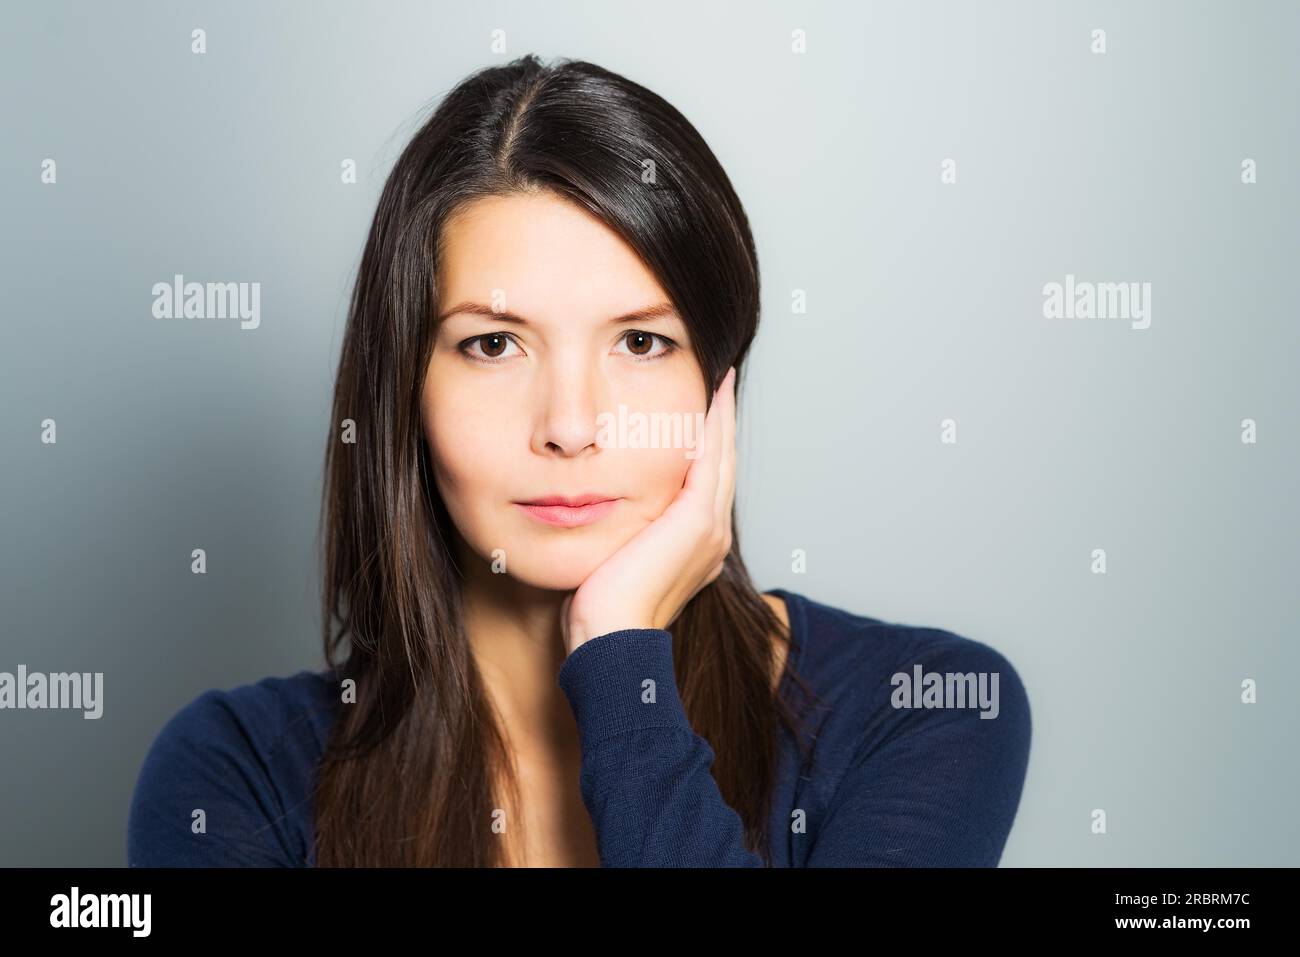 Thoughtful attractive woman with a serene face and enigmatic smile standing with her hand to her chin looking pensively at the camera Stock Photo